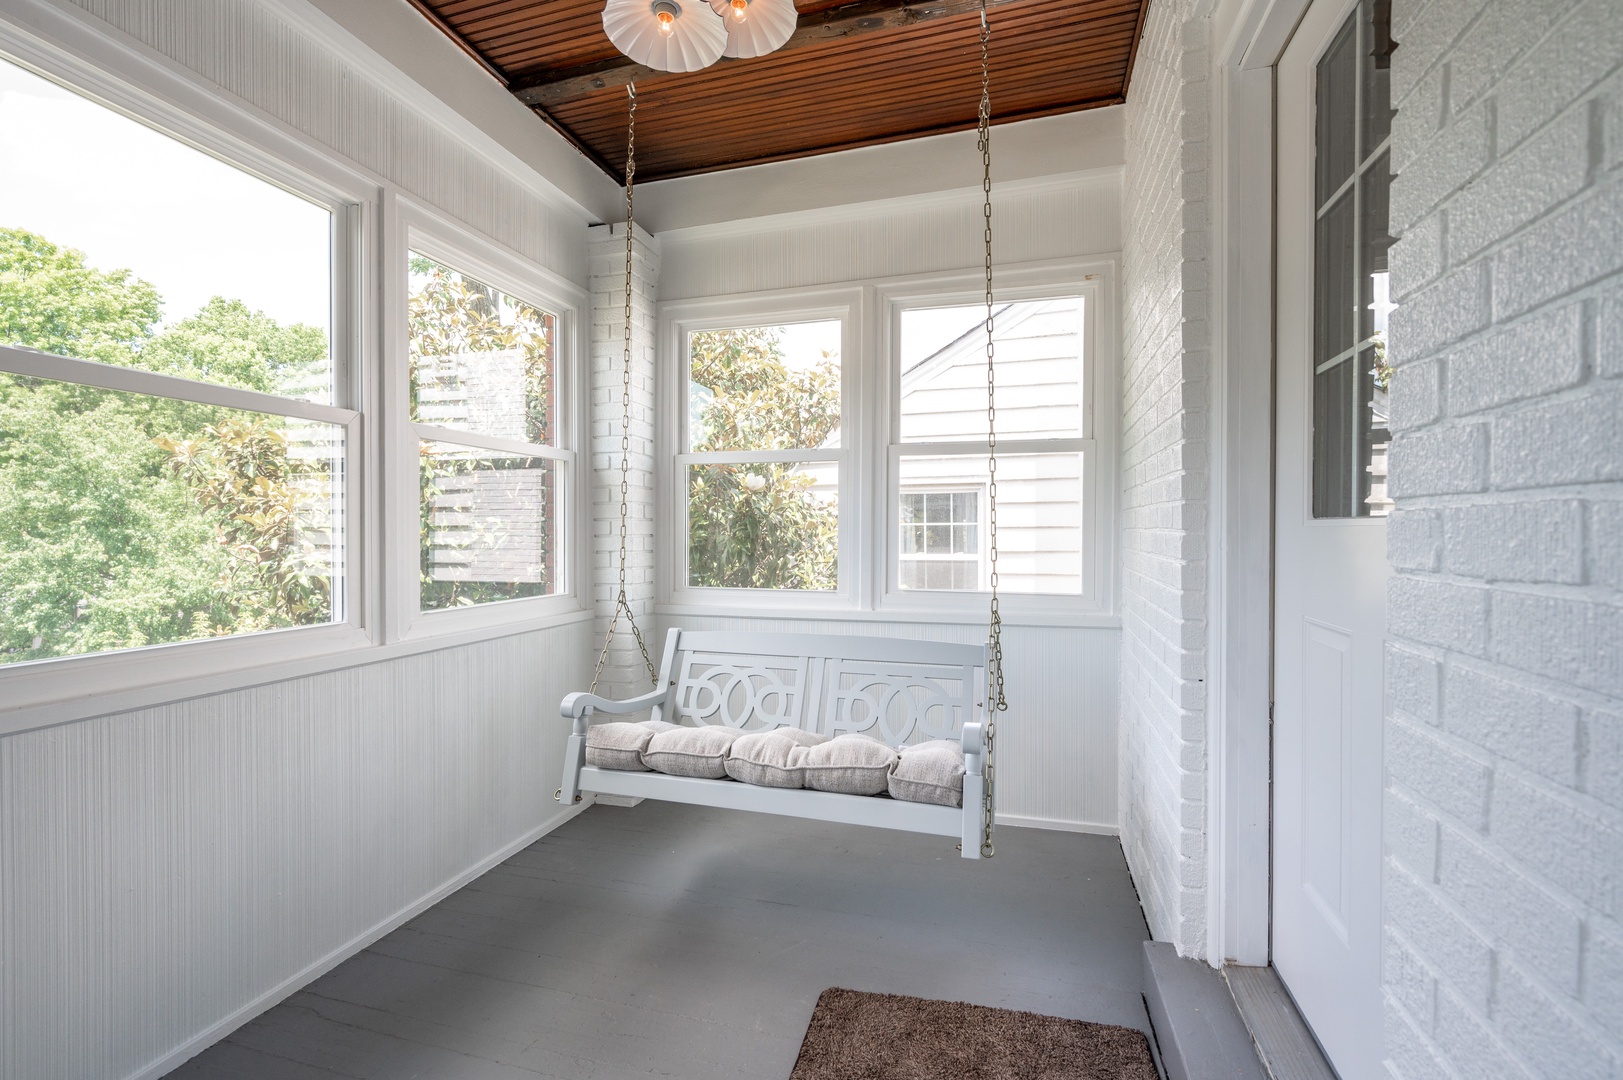 Unit 2 – The sunroom porch swing is the perfect spot for relaxing with a book